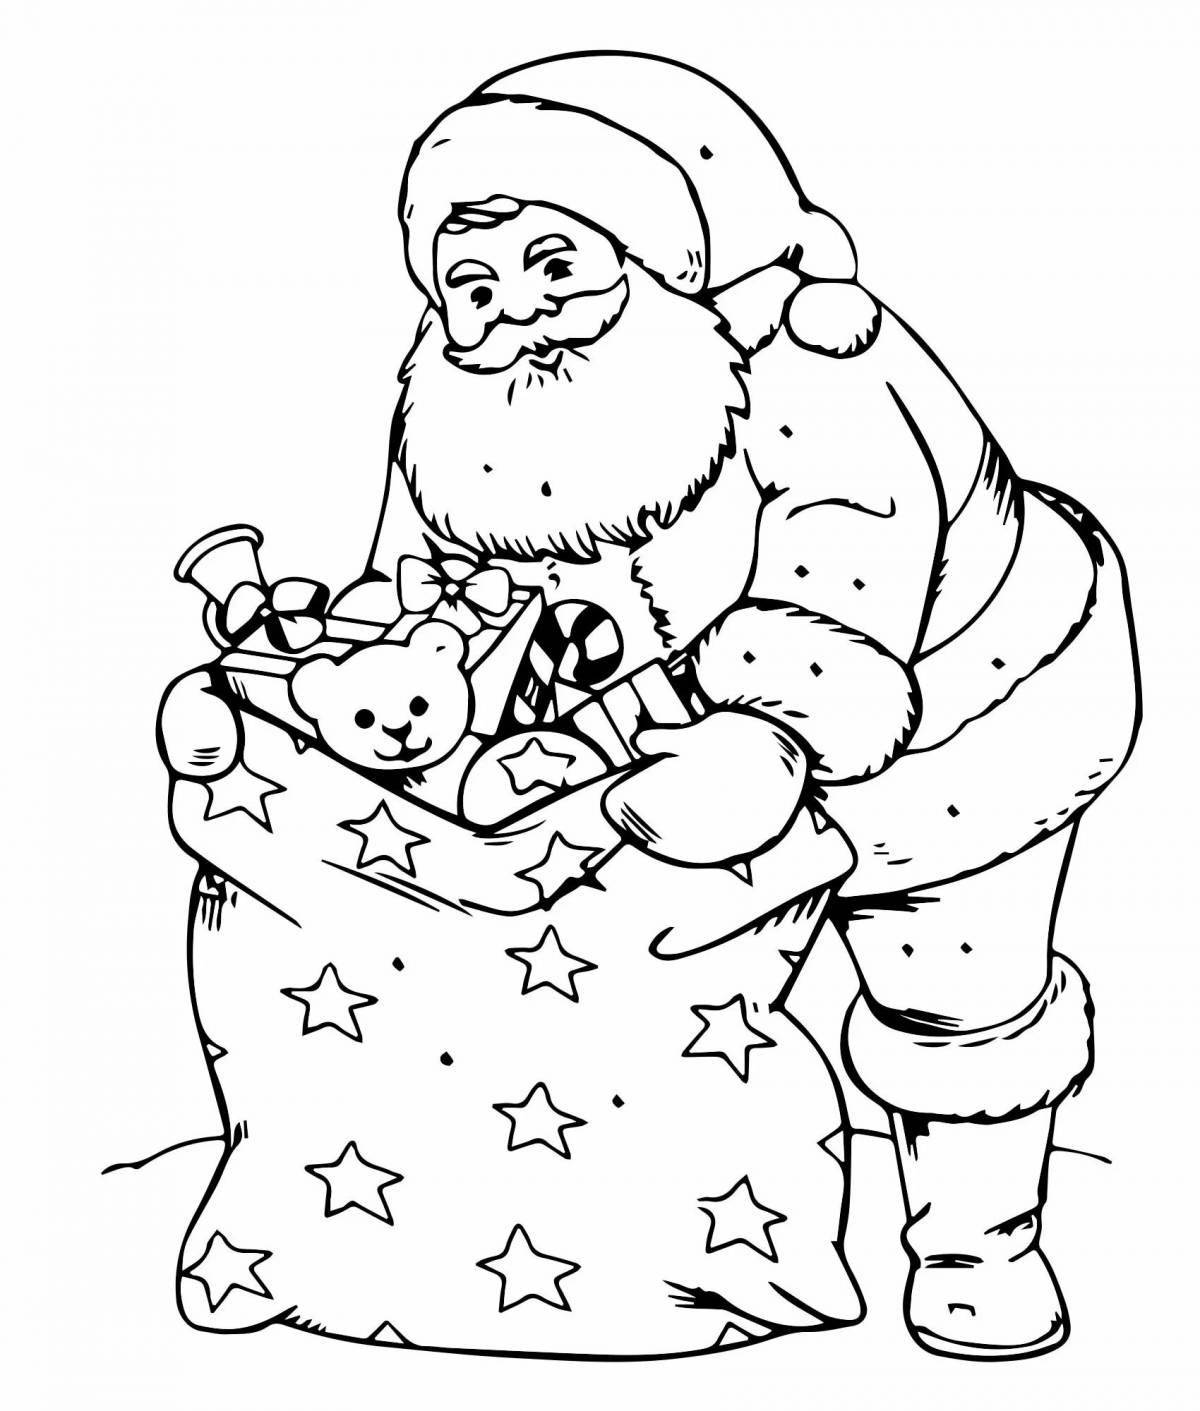 Coloring chic Santa Claus with a bag